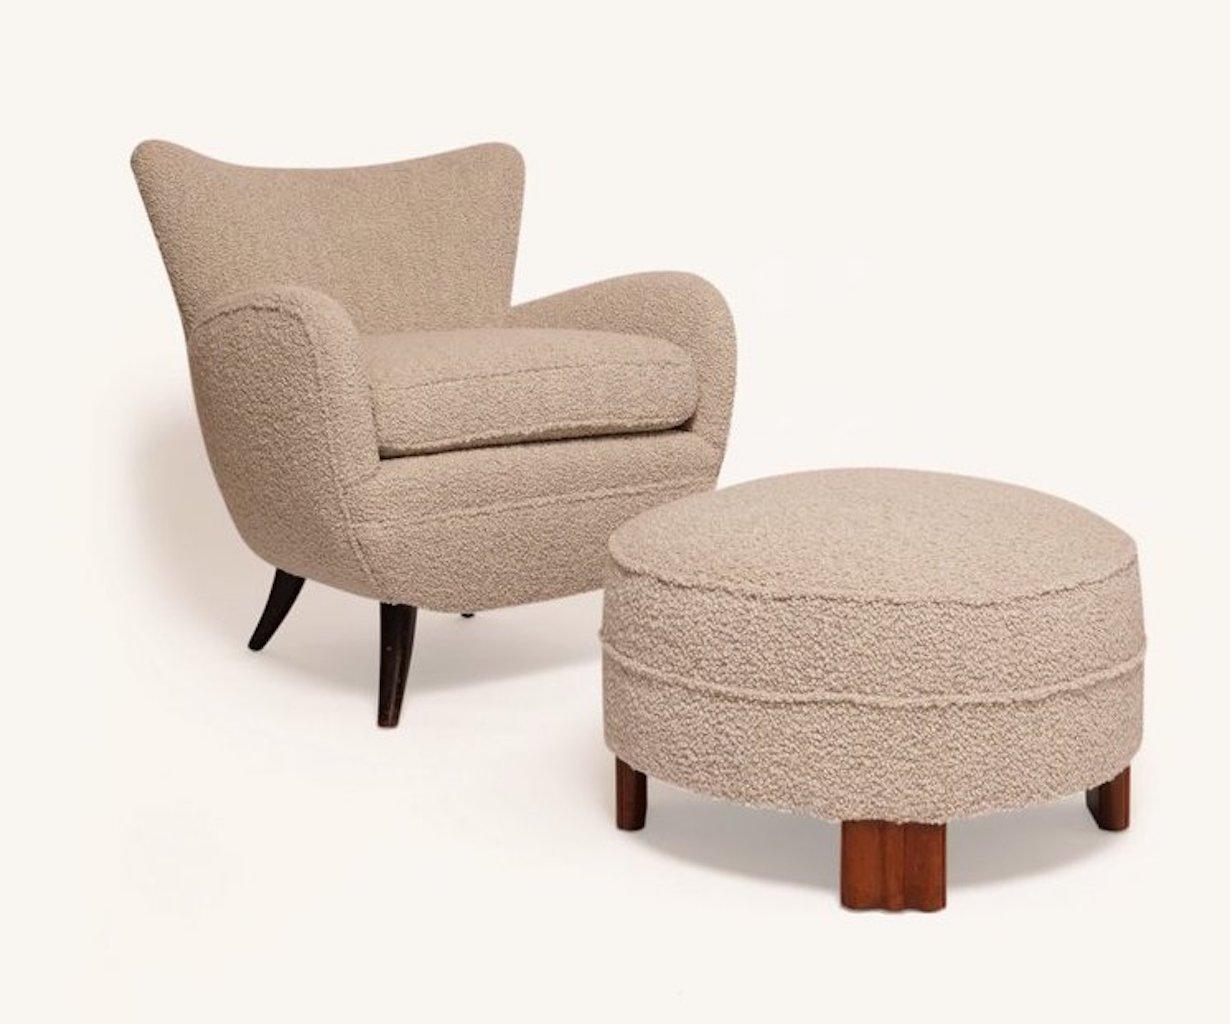 This boucle lounge chair designed by Ernst Schwadron and reupholstered by the Somerset House is indicative of the restrained Viennese modernist style typically seen in Austria during the 1930s. Schwadron’s interior designs, furniture and lamps were